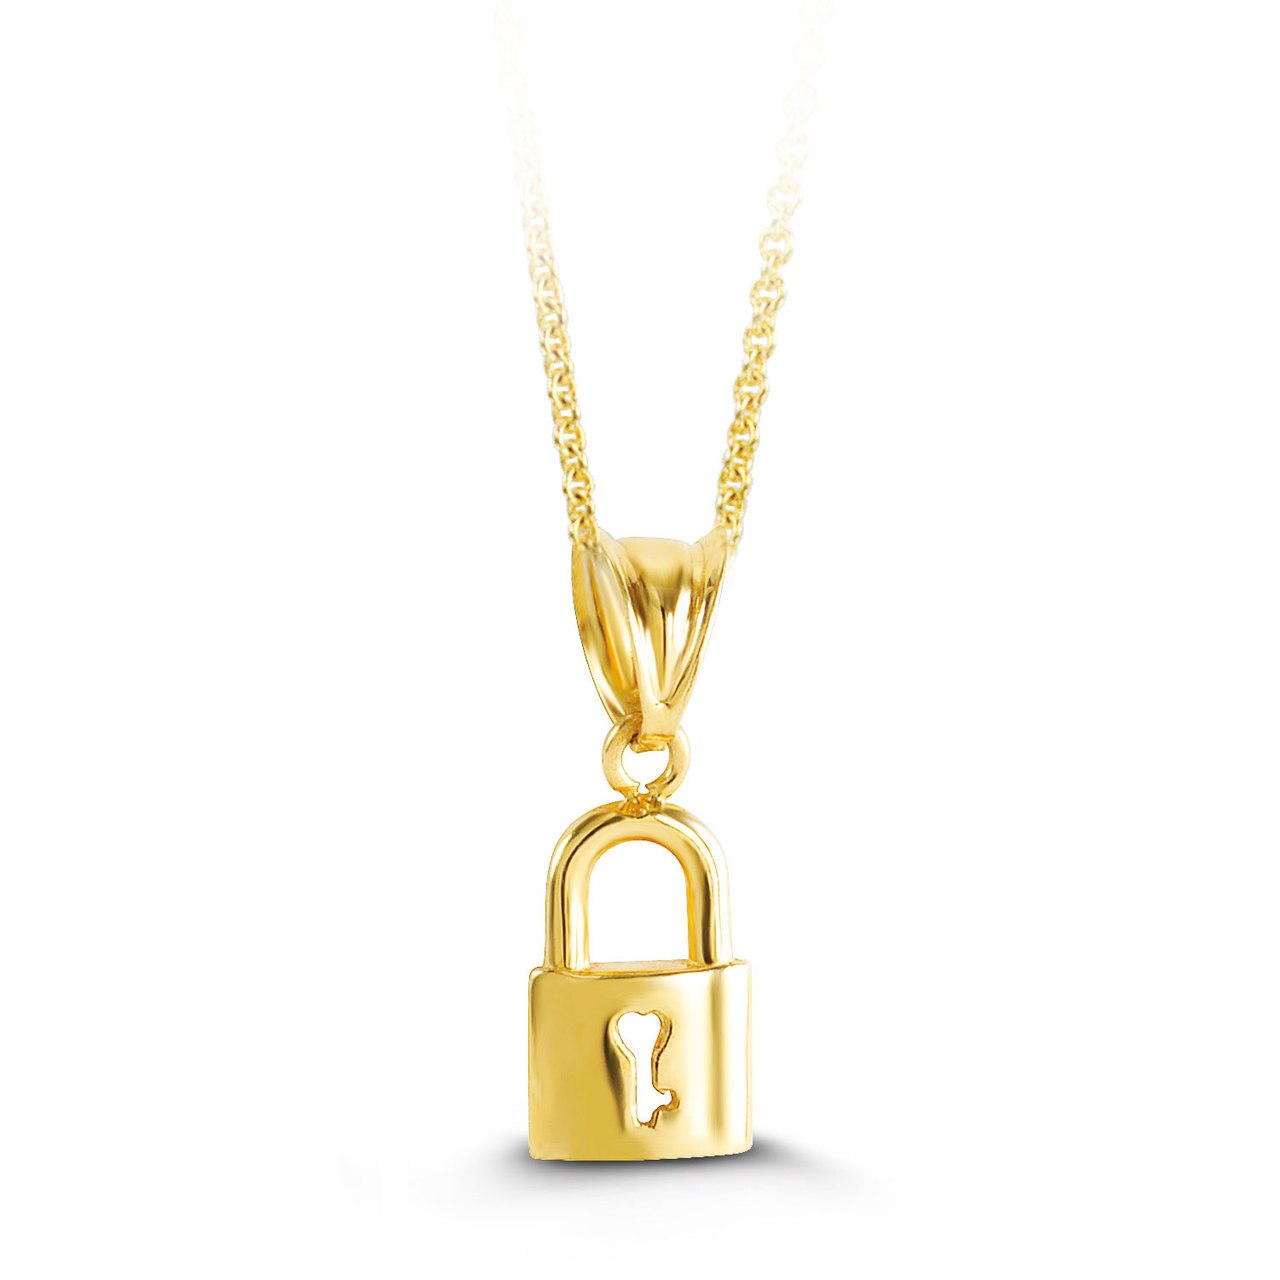 10K Yellow Gold Lock Pendant with Chain